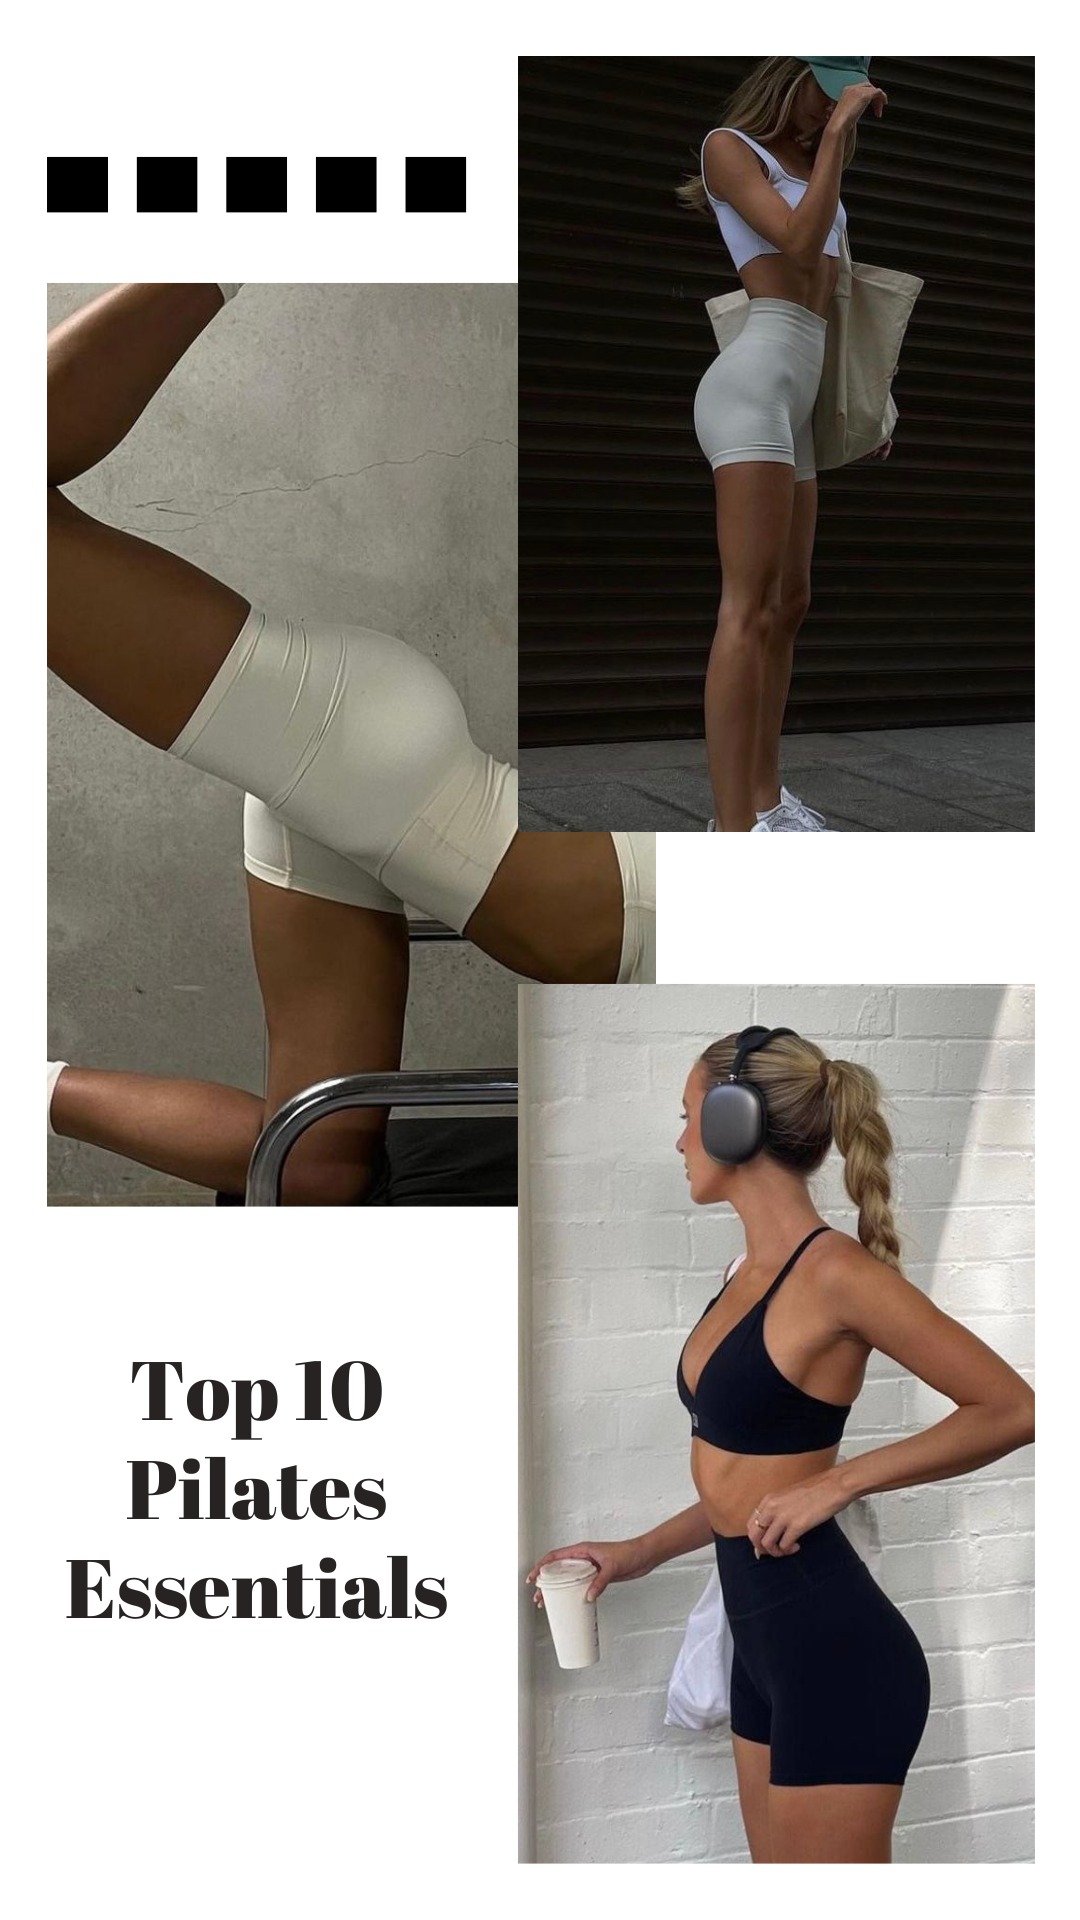 Top 10 Pilates Essentials: Building the Perfect Wardrobe for